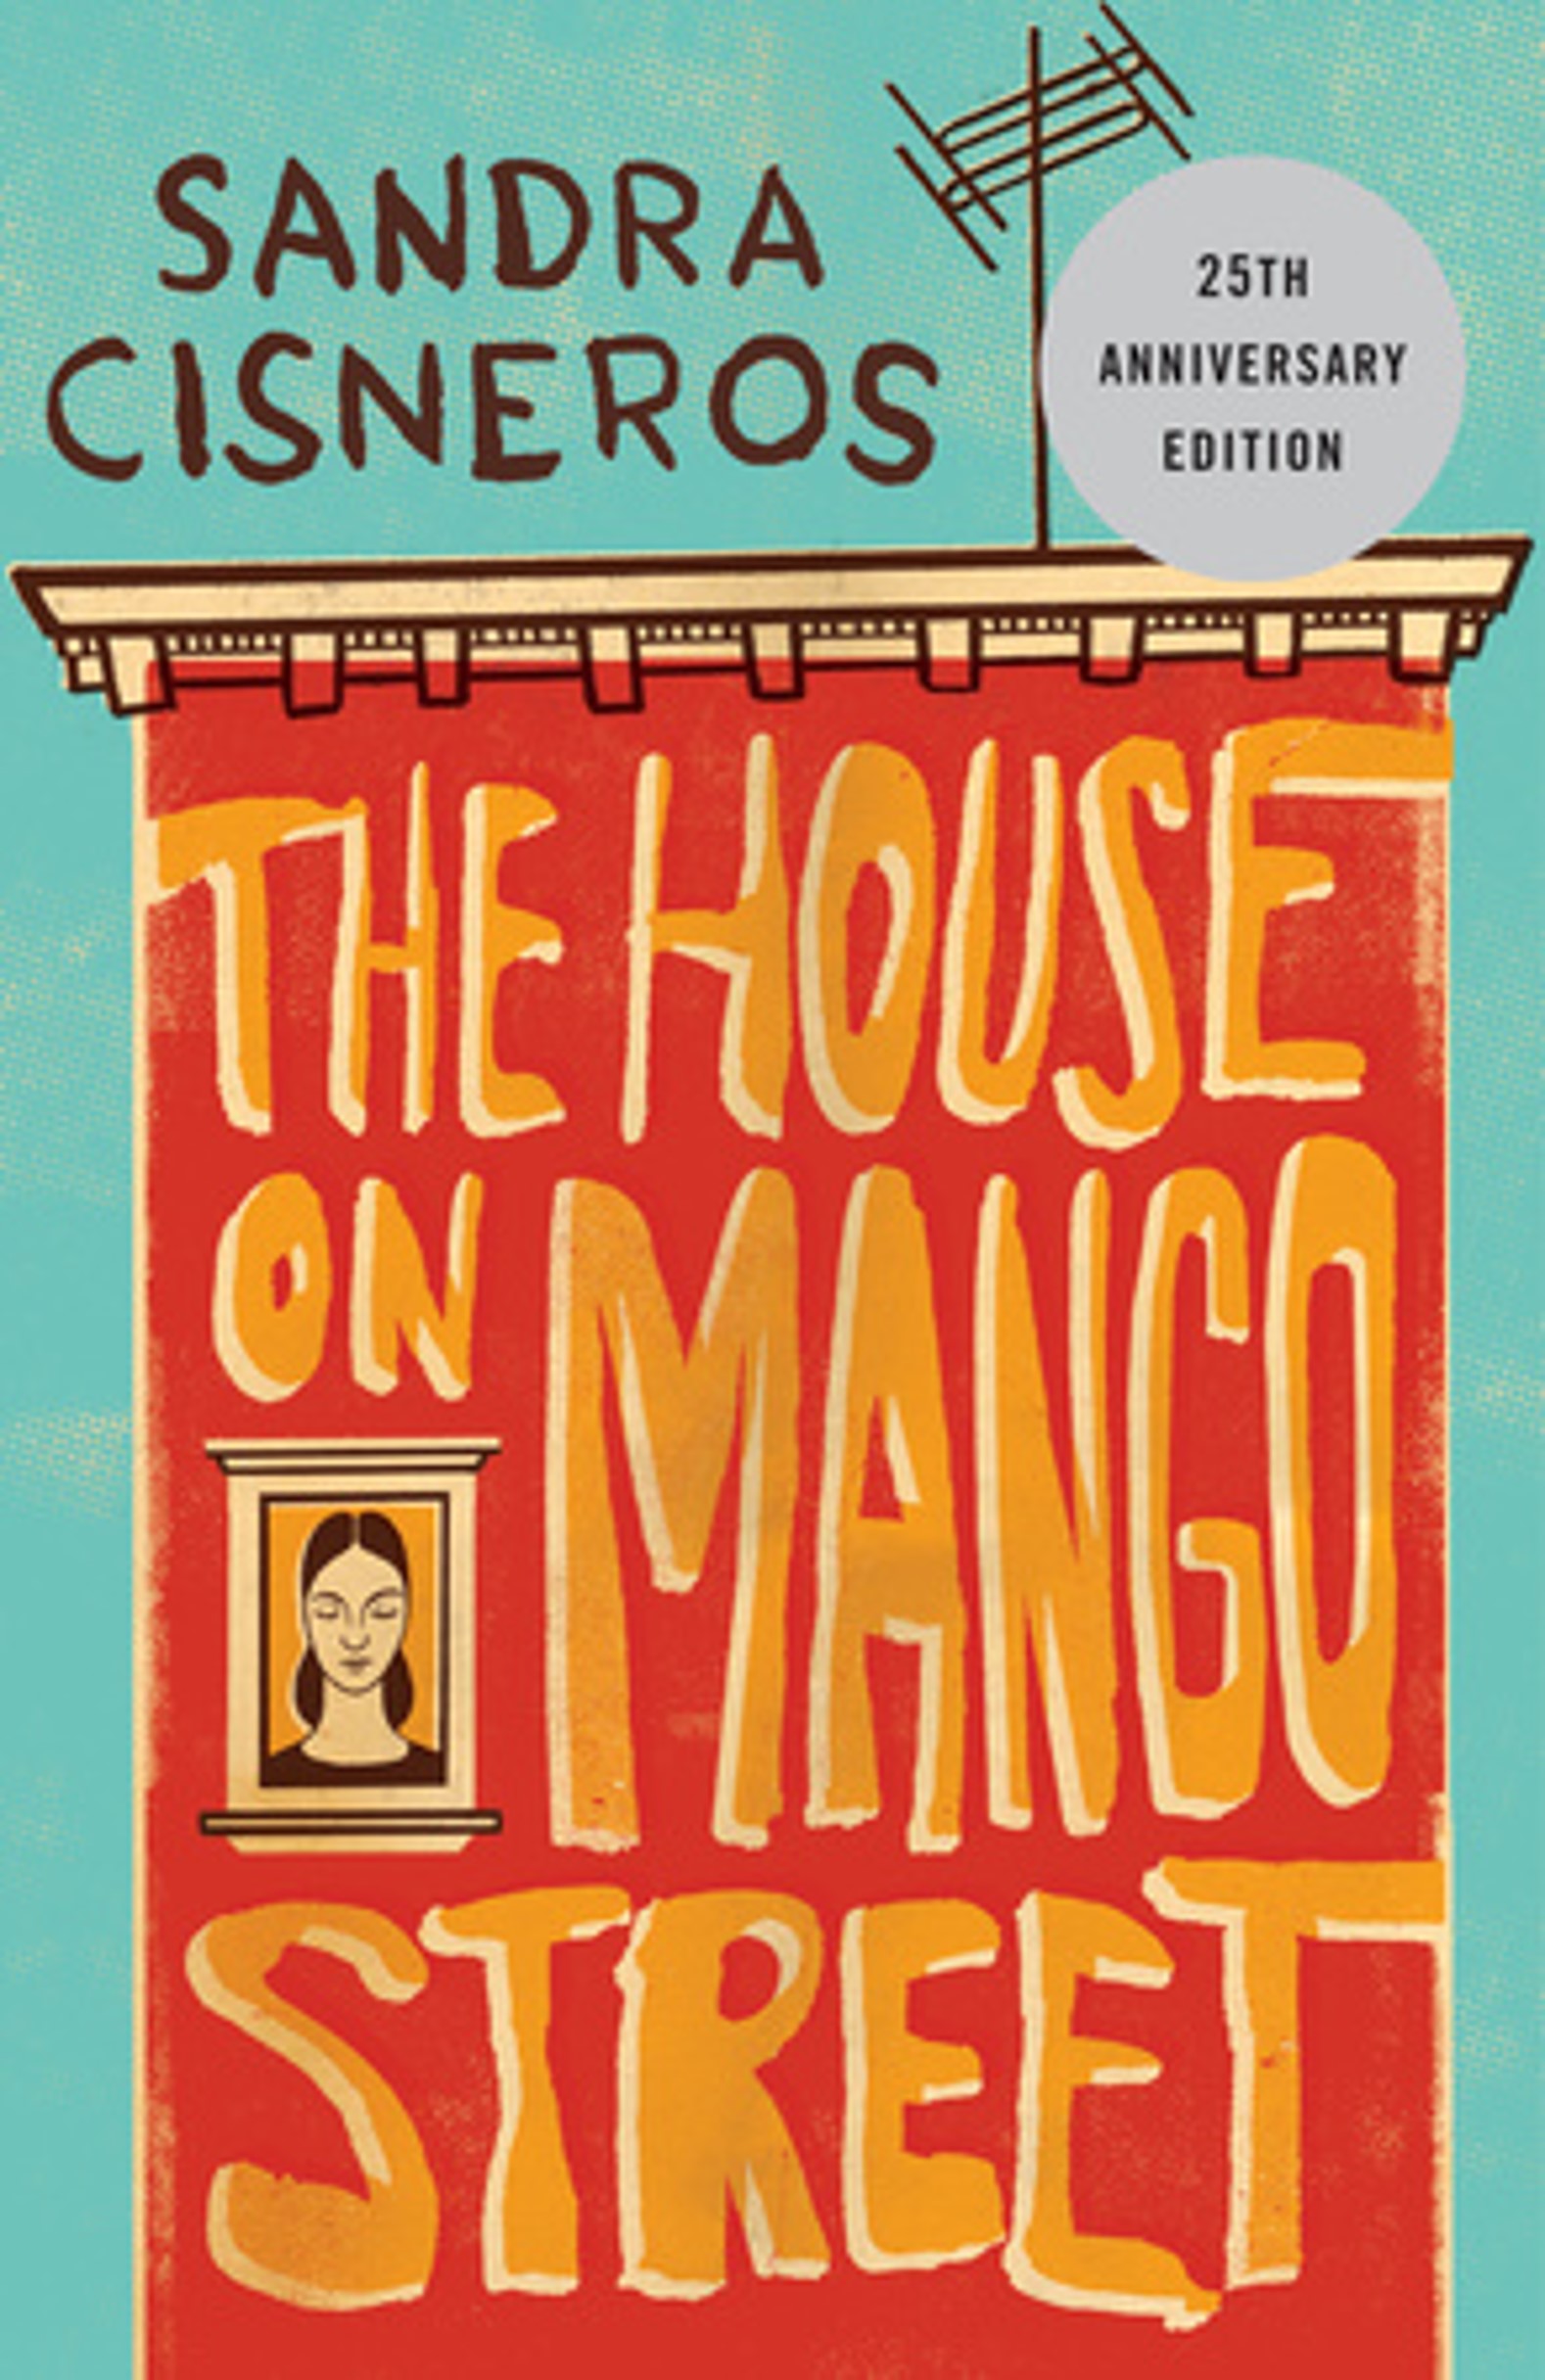 Book cover of The House on Mango Street.